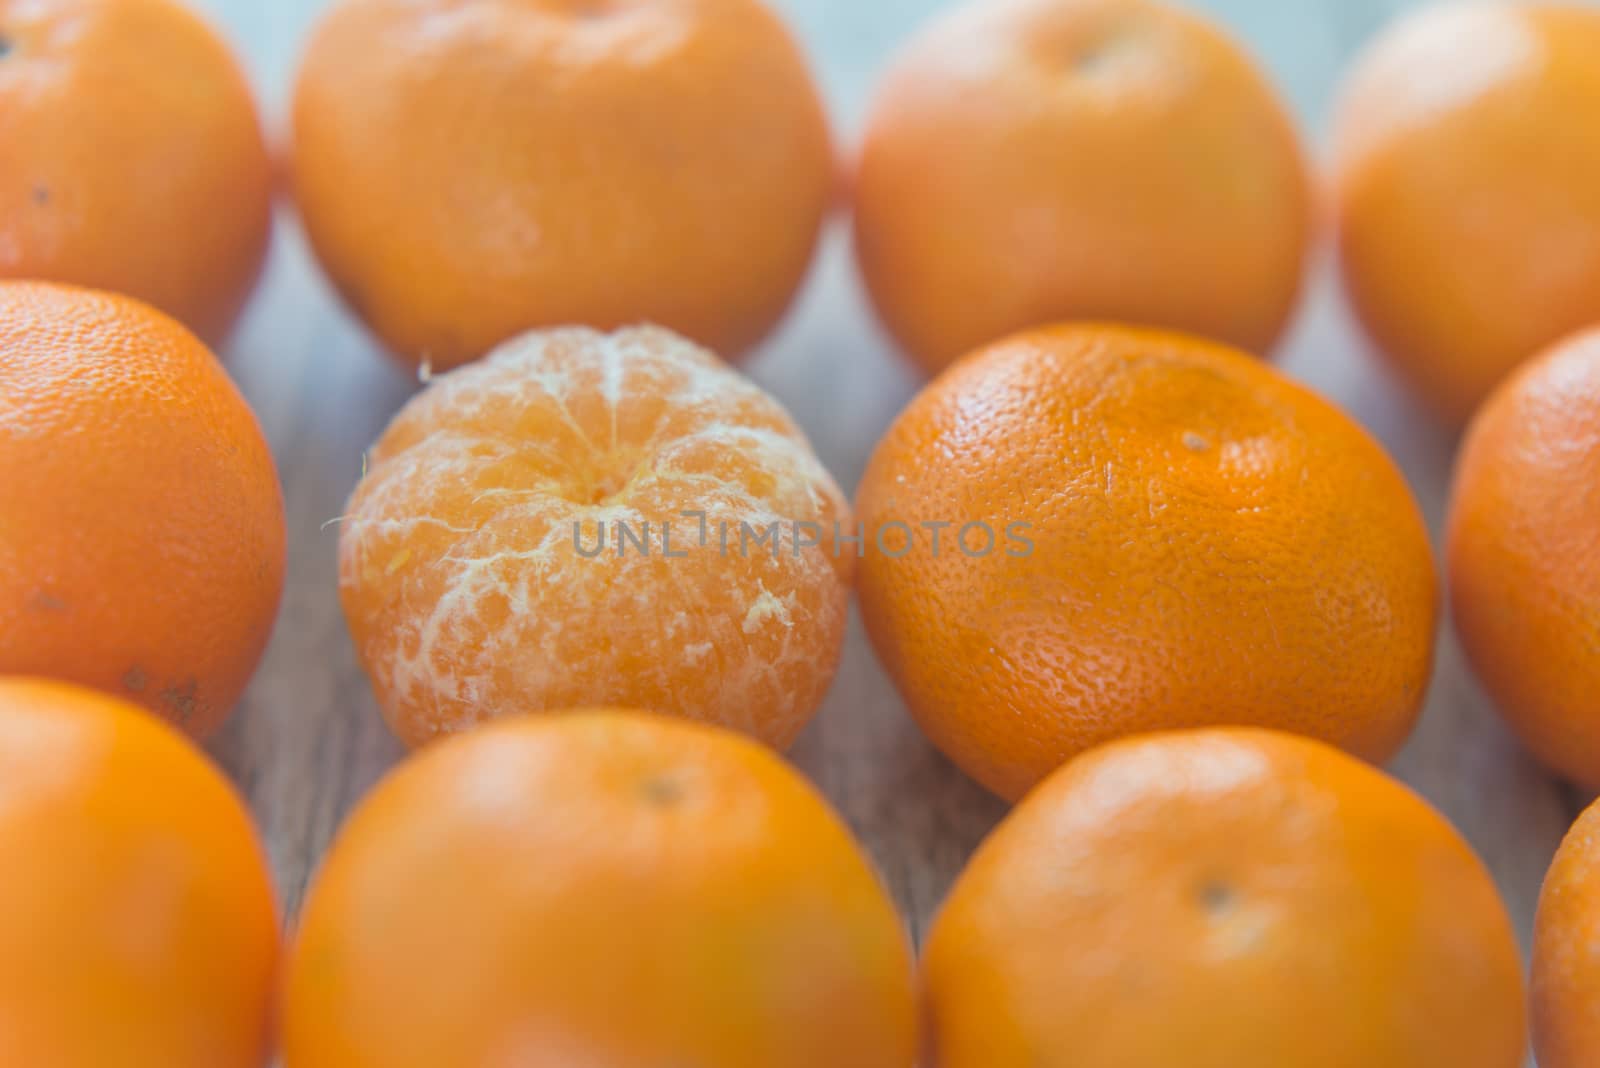 Group of the tangerines on the wood background